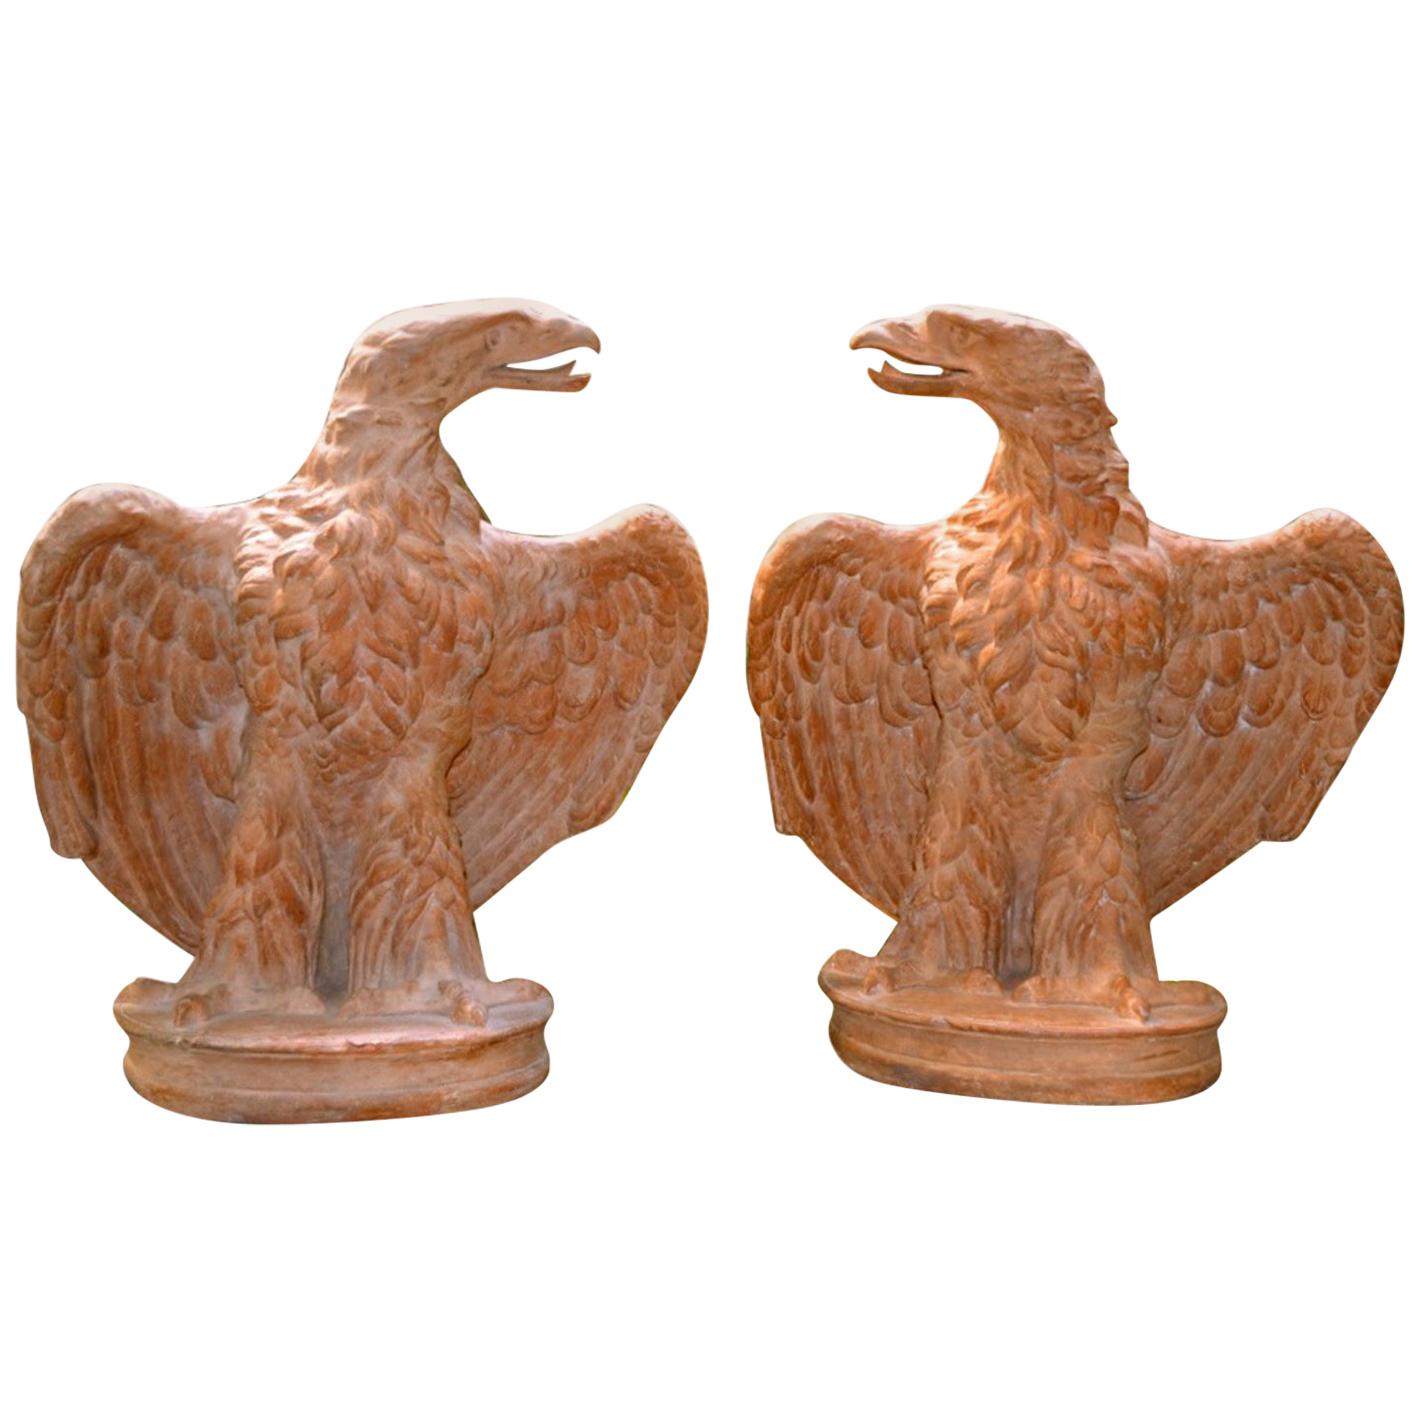 Pair of Italian Terracotta Eagles After a 1 st Century AD Roman Marble Original For Sale